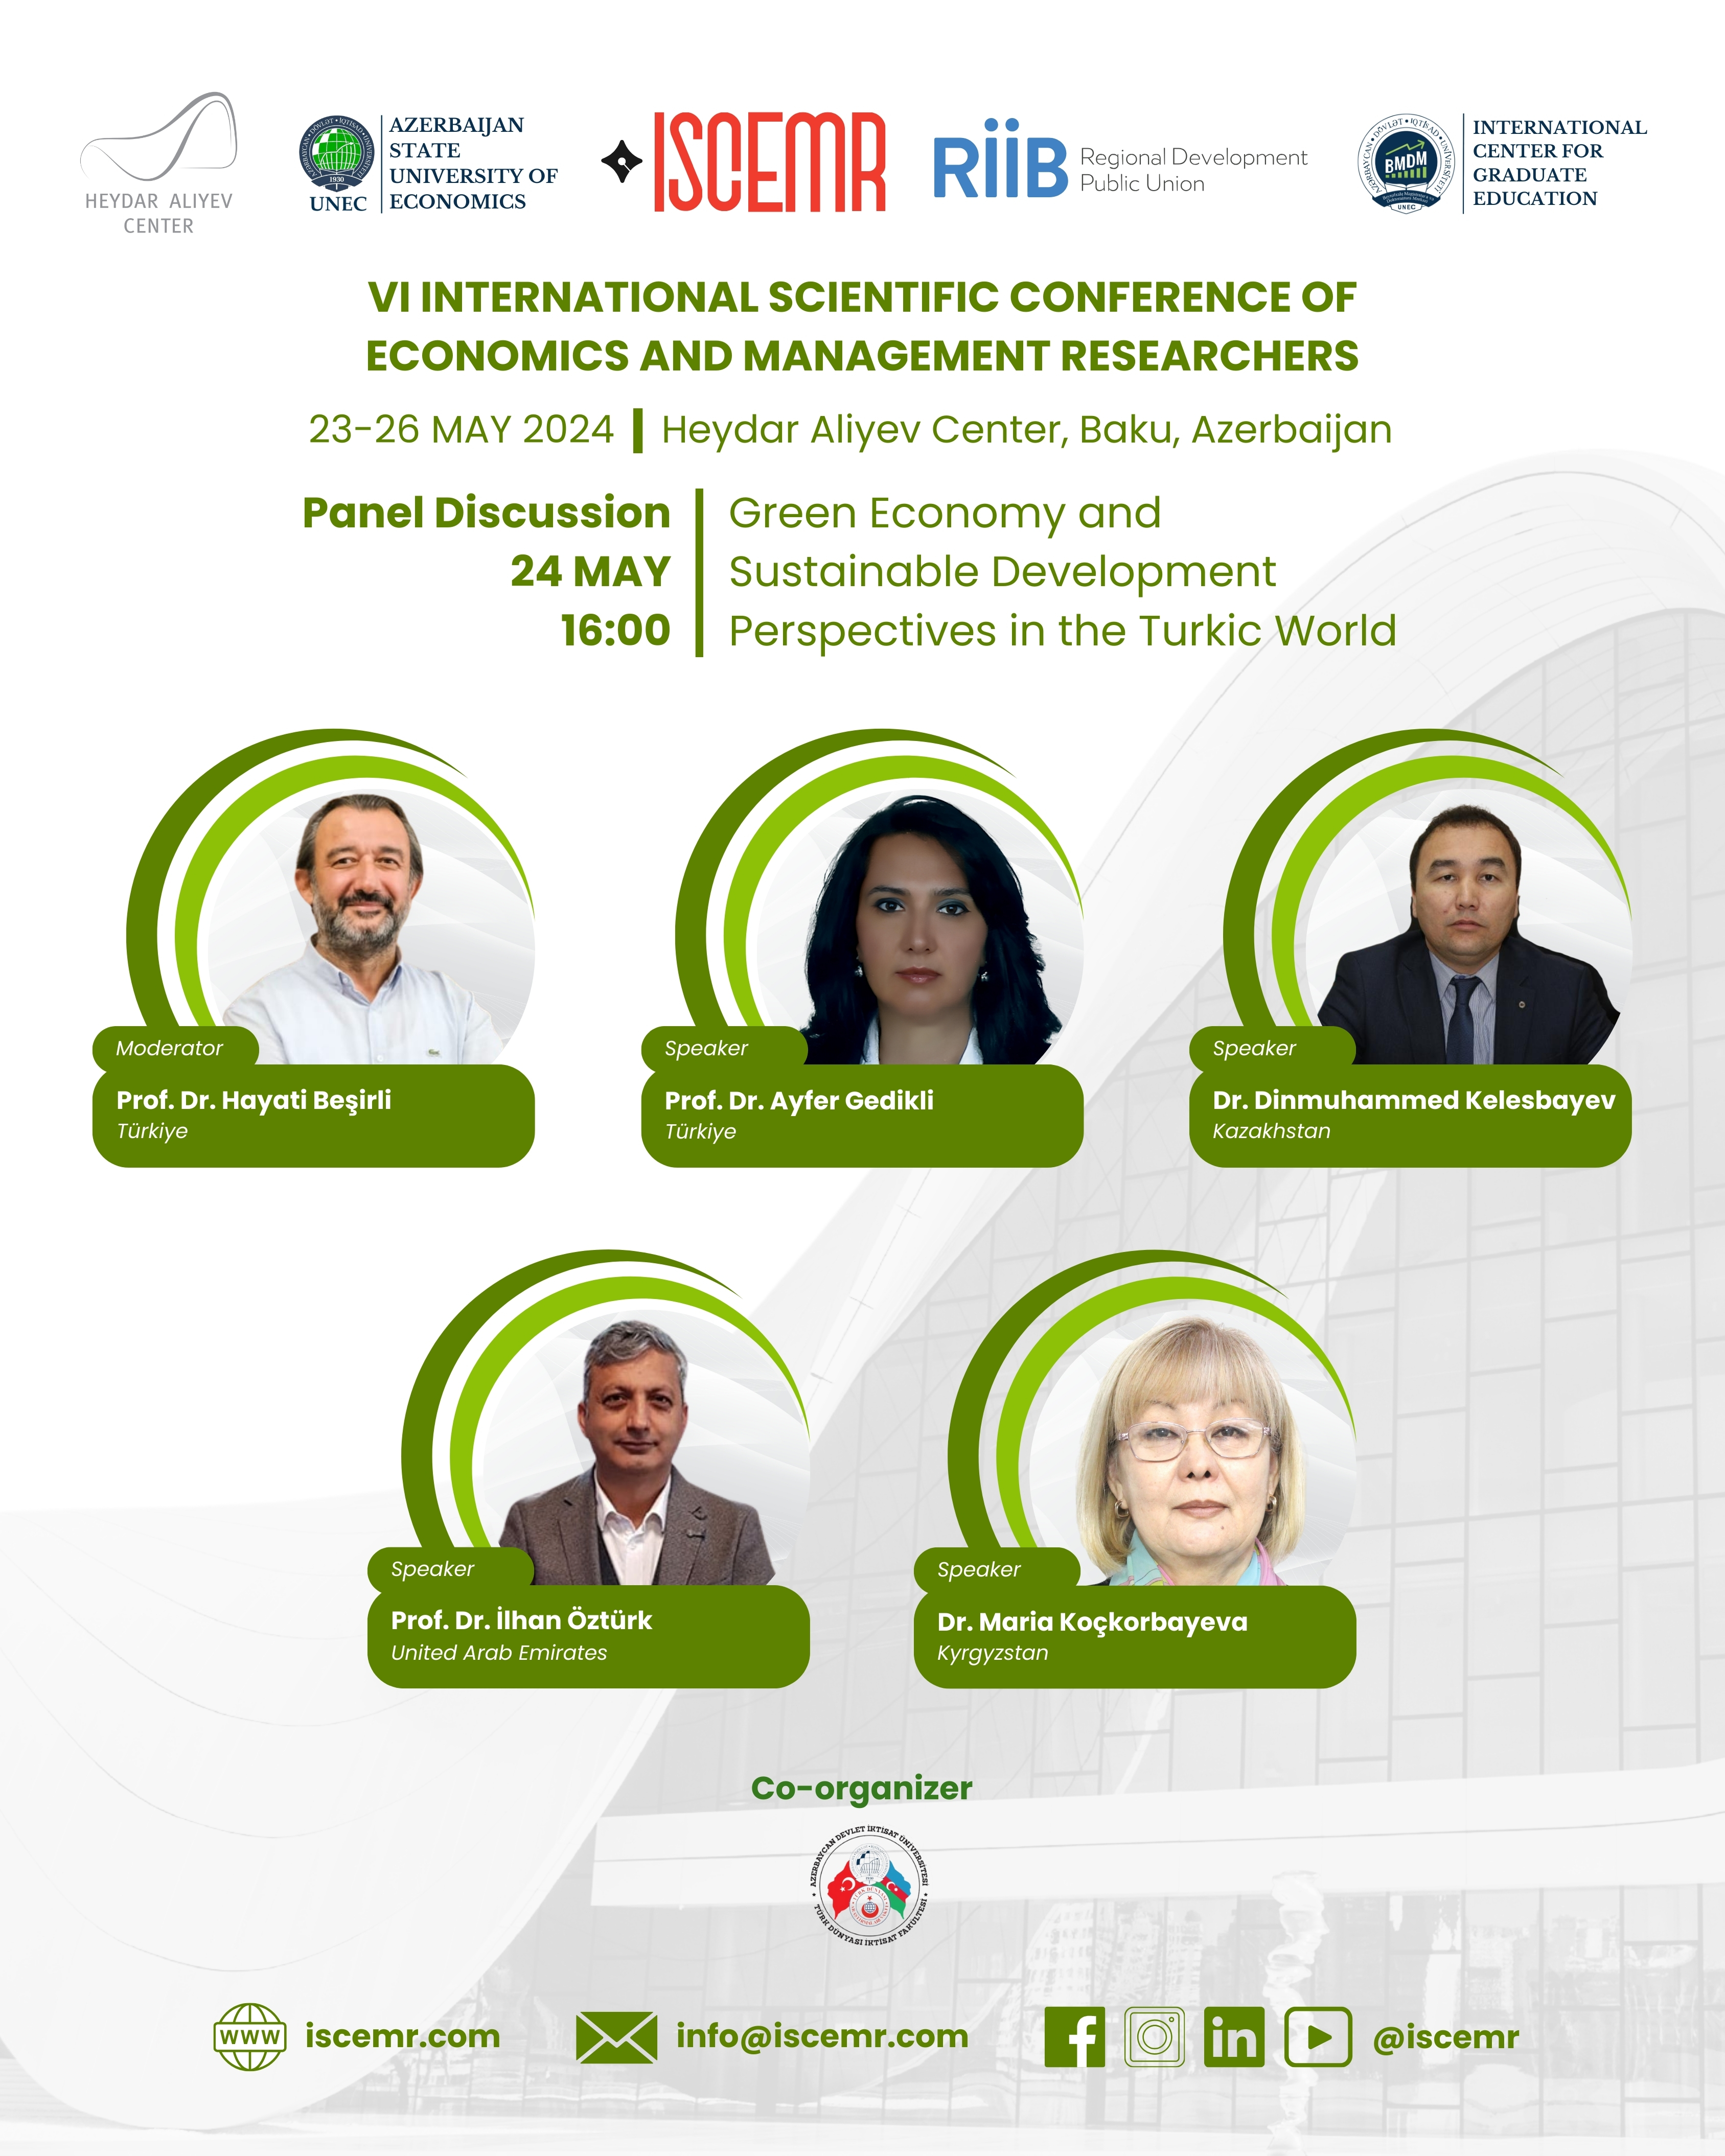 Green Economy and Sustainable Development Perspectives in the Turkic World